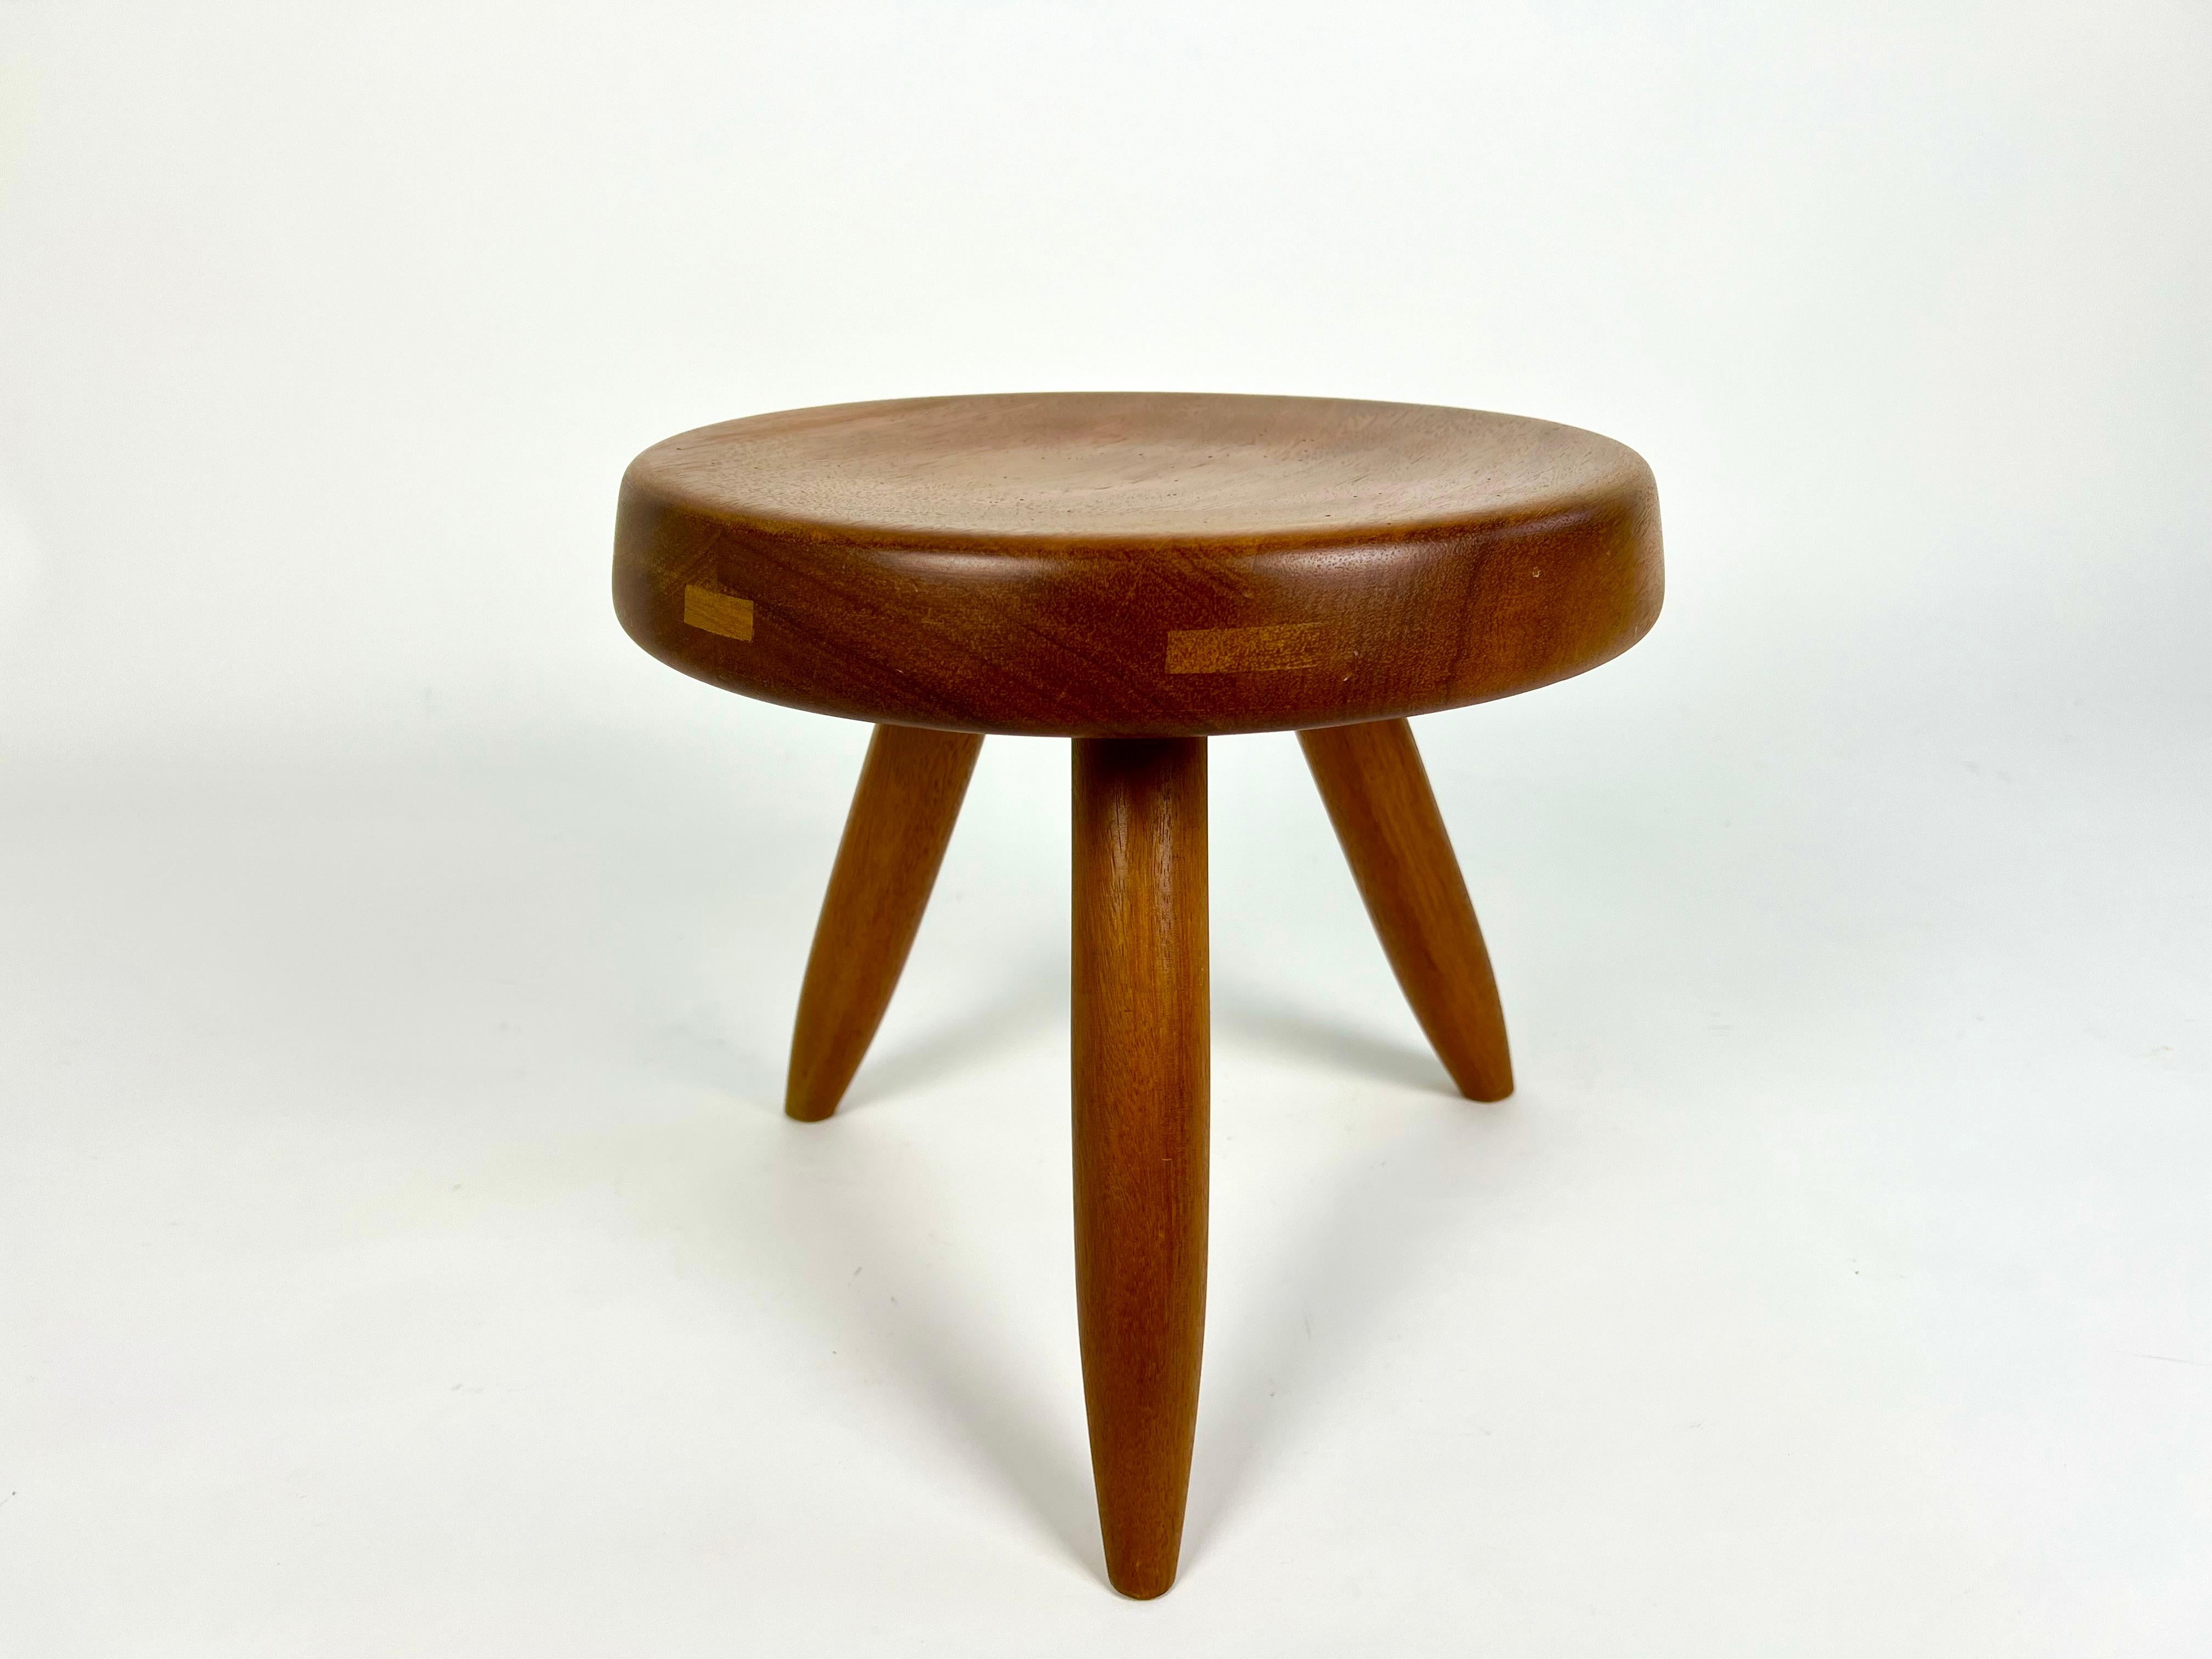 Berger low stool in mahogany, Charlotte Perriand 3